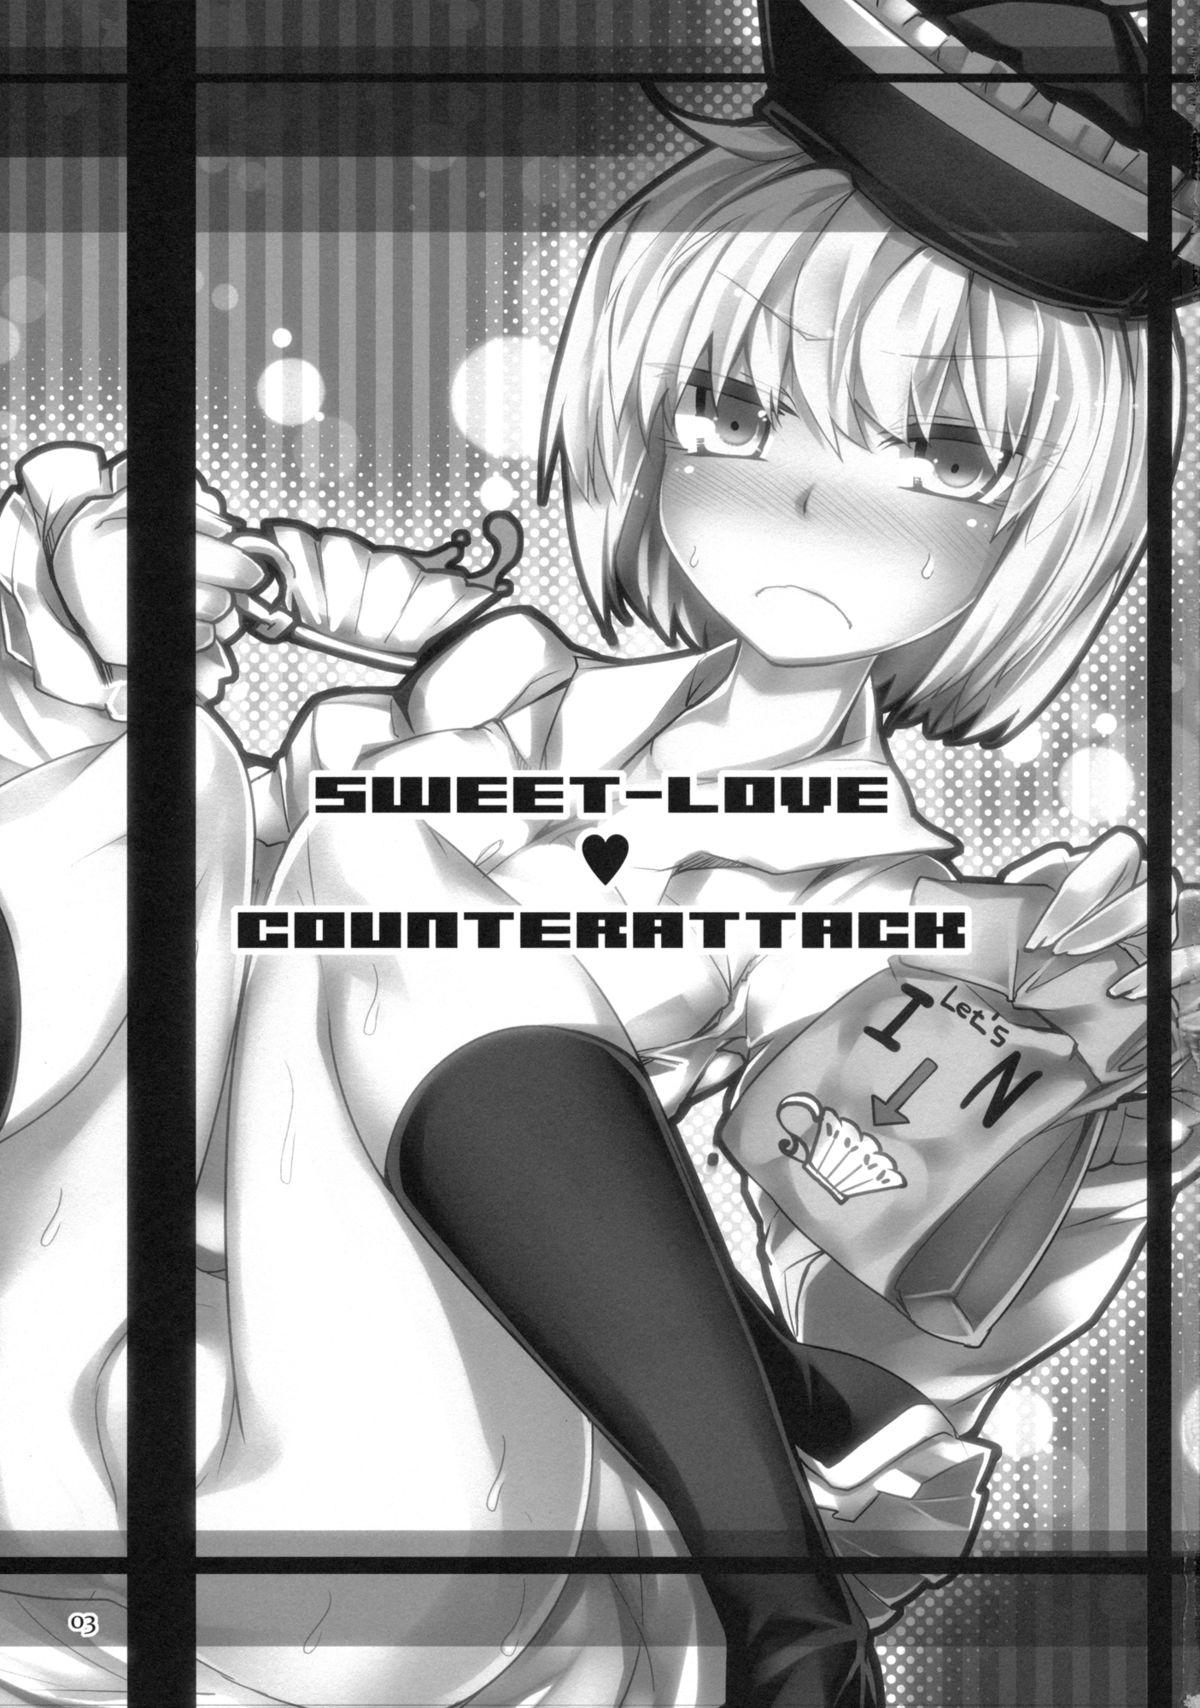 SWEET-LOVE COUNTERATTACK!! 1